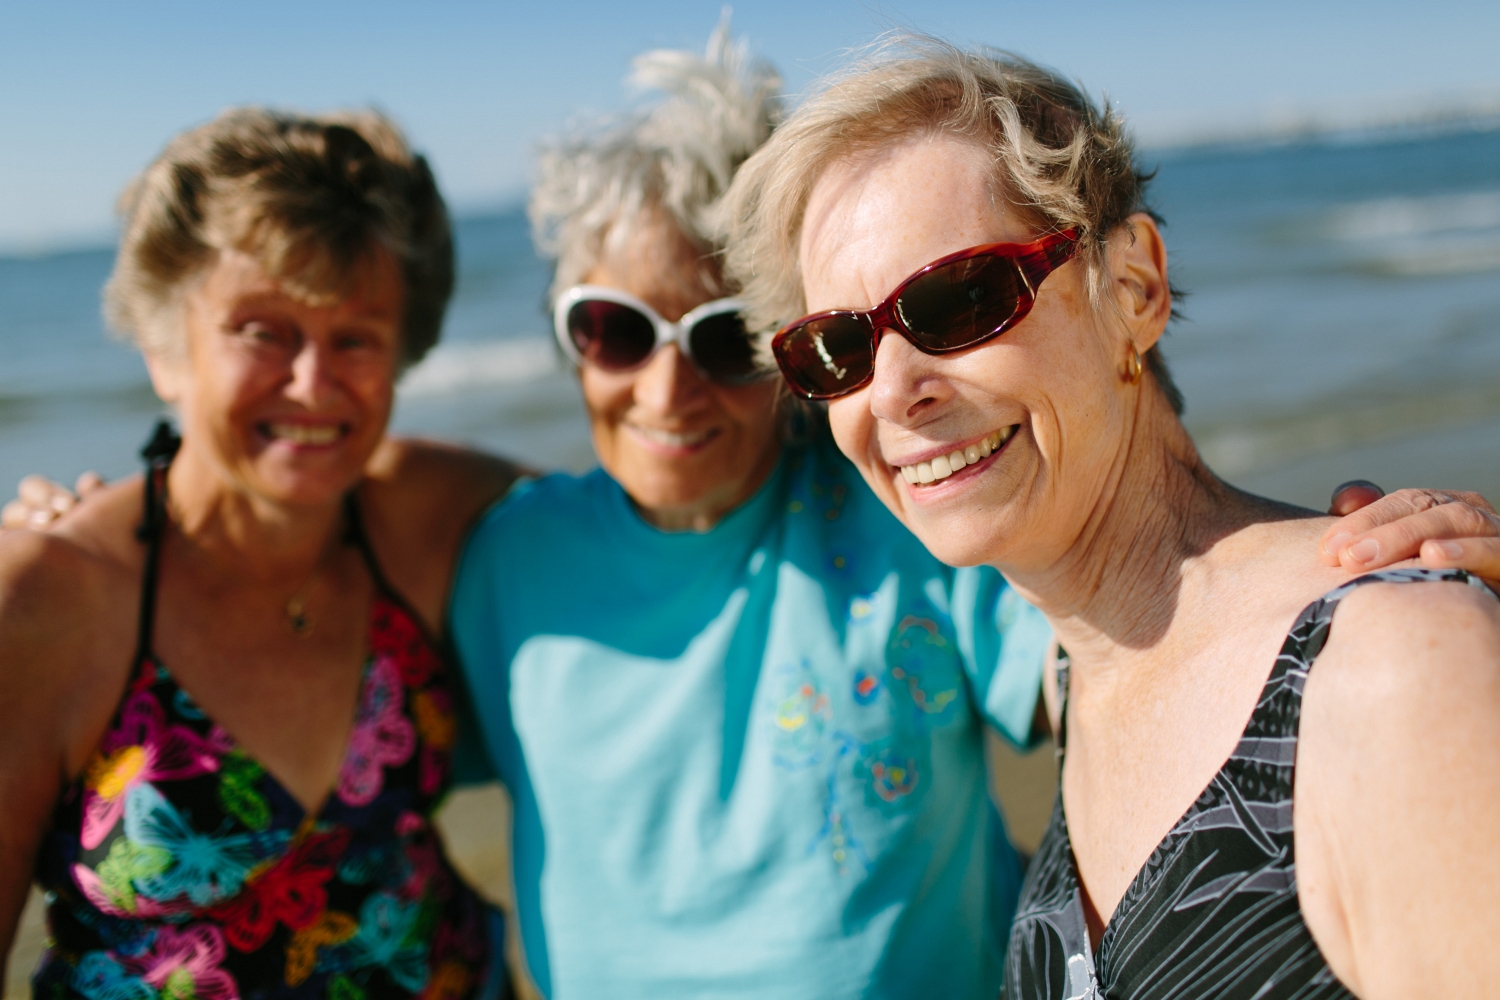 Group of Retired Woman Smiling Together